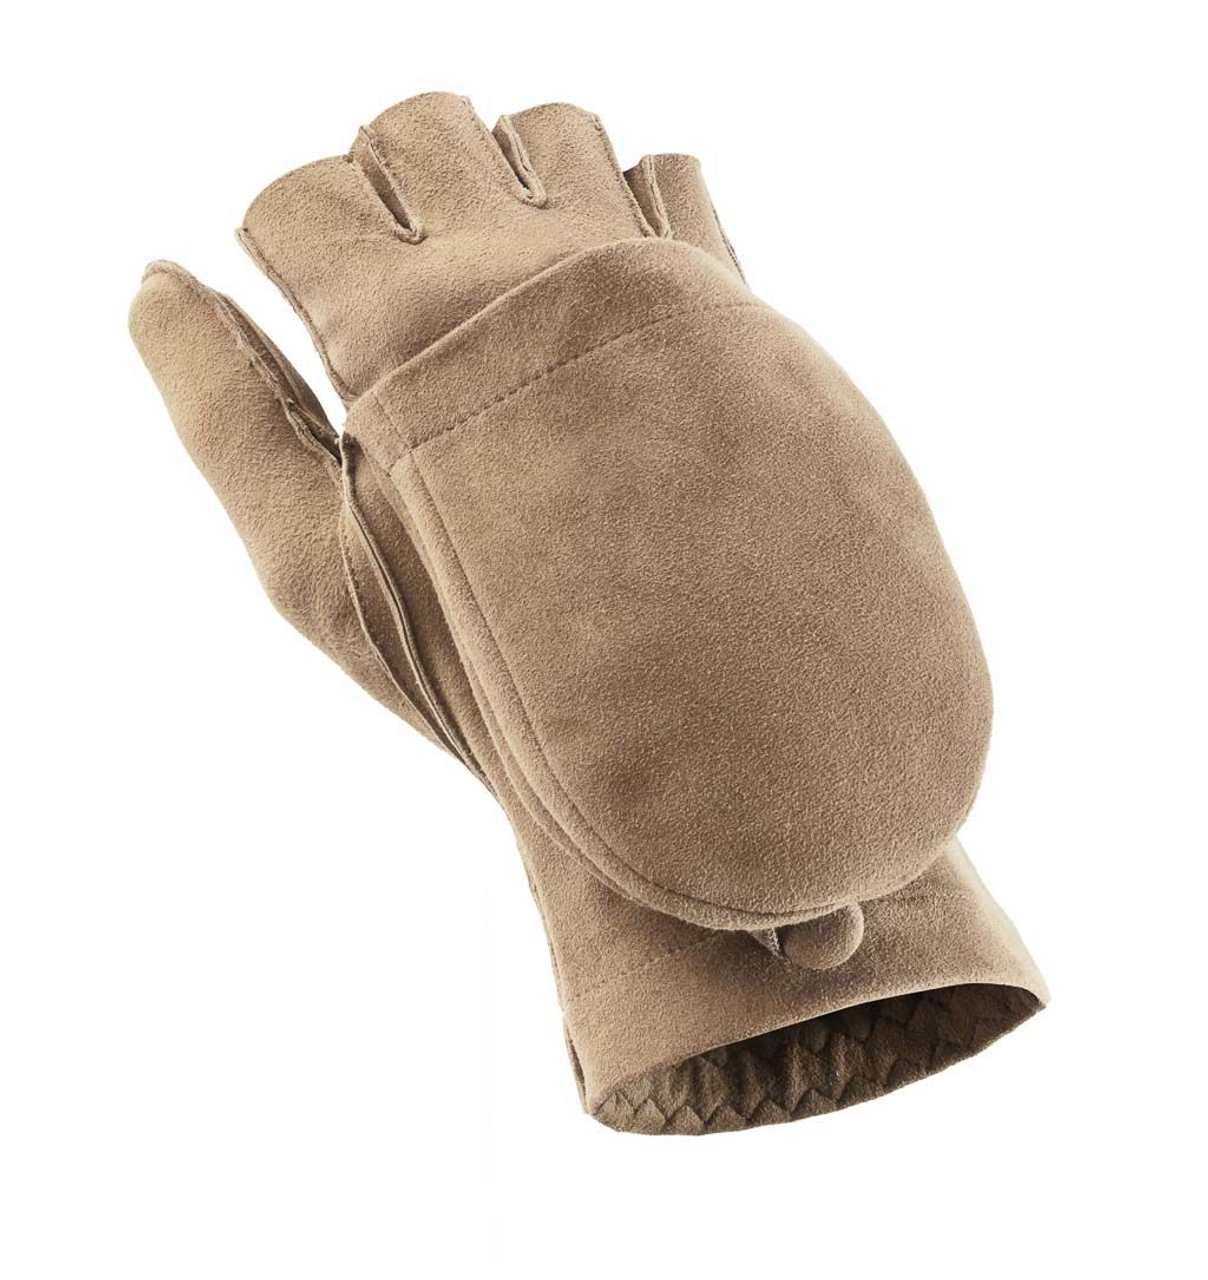 Gaston J. Glock Hunting Gloves Made of Reindeer Leather / unlined FL -  Connecticut Shotgun Manufacturing Company